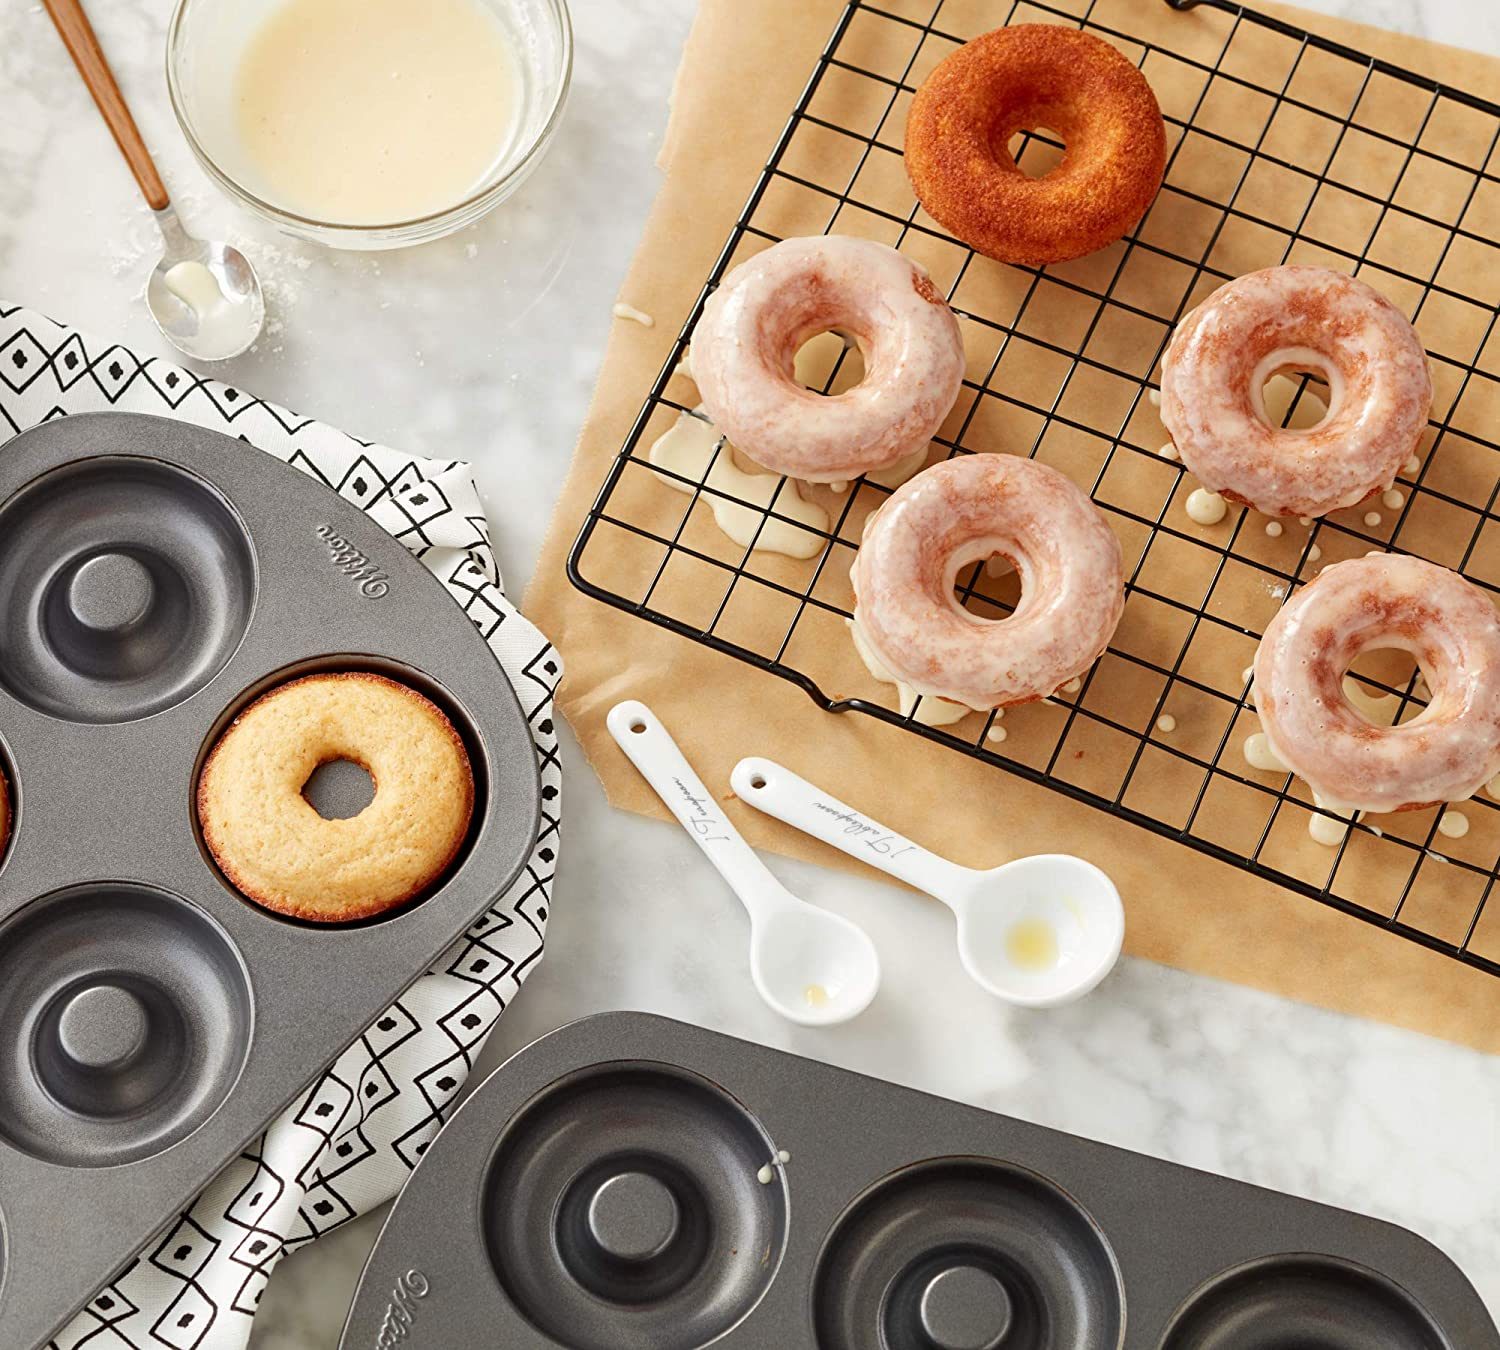 8 Best Donut Molds in 2023: Silicone, Mini and More Options